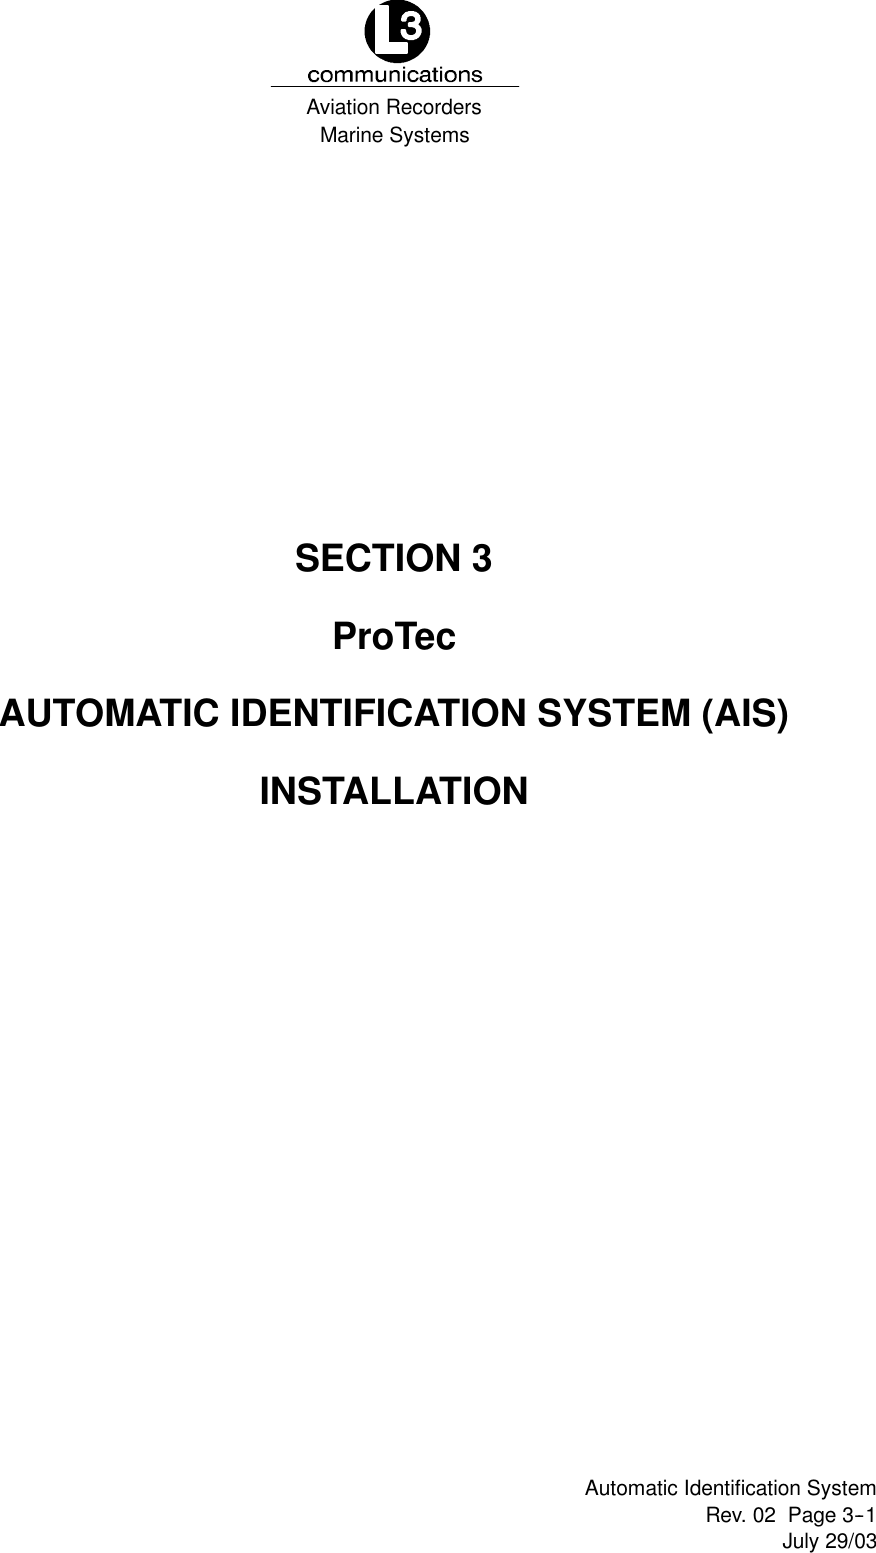 Marine SystemsAviation RecordersRev. 02 Page 3--1July 29/03Automatic Identification SystemSECTION 3ProTecAUTOMATIC IDENTIFICATION SYSTEM (AIS)INSTALLATION